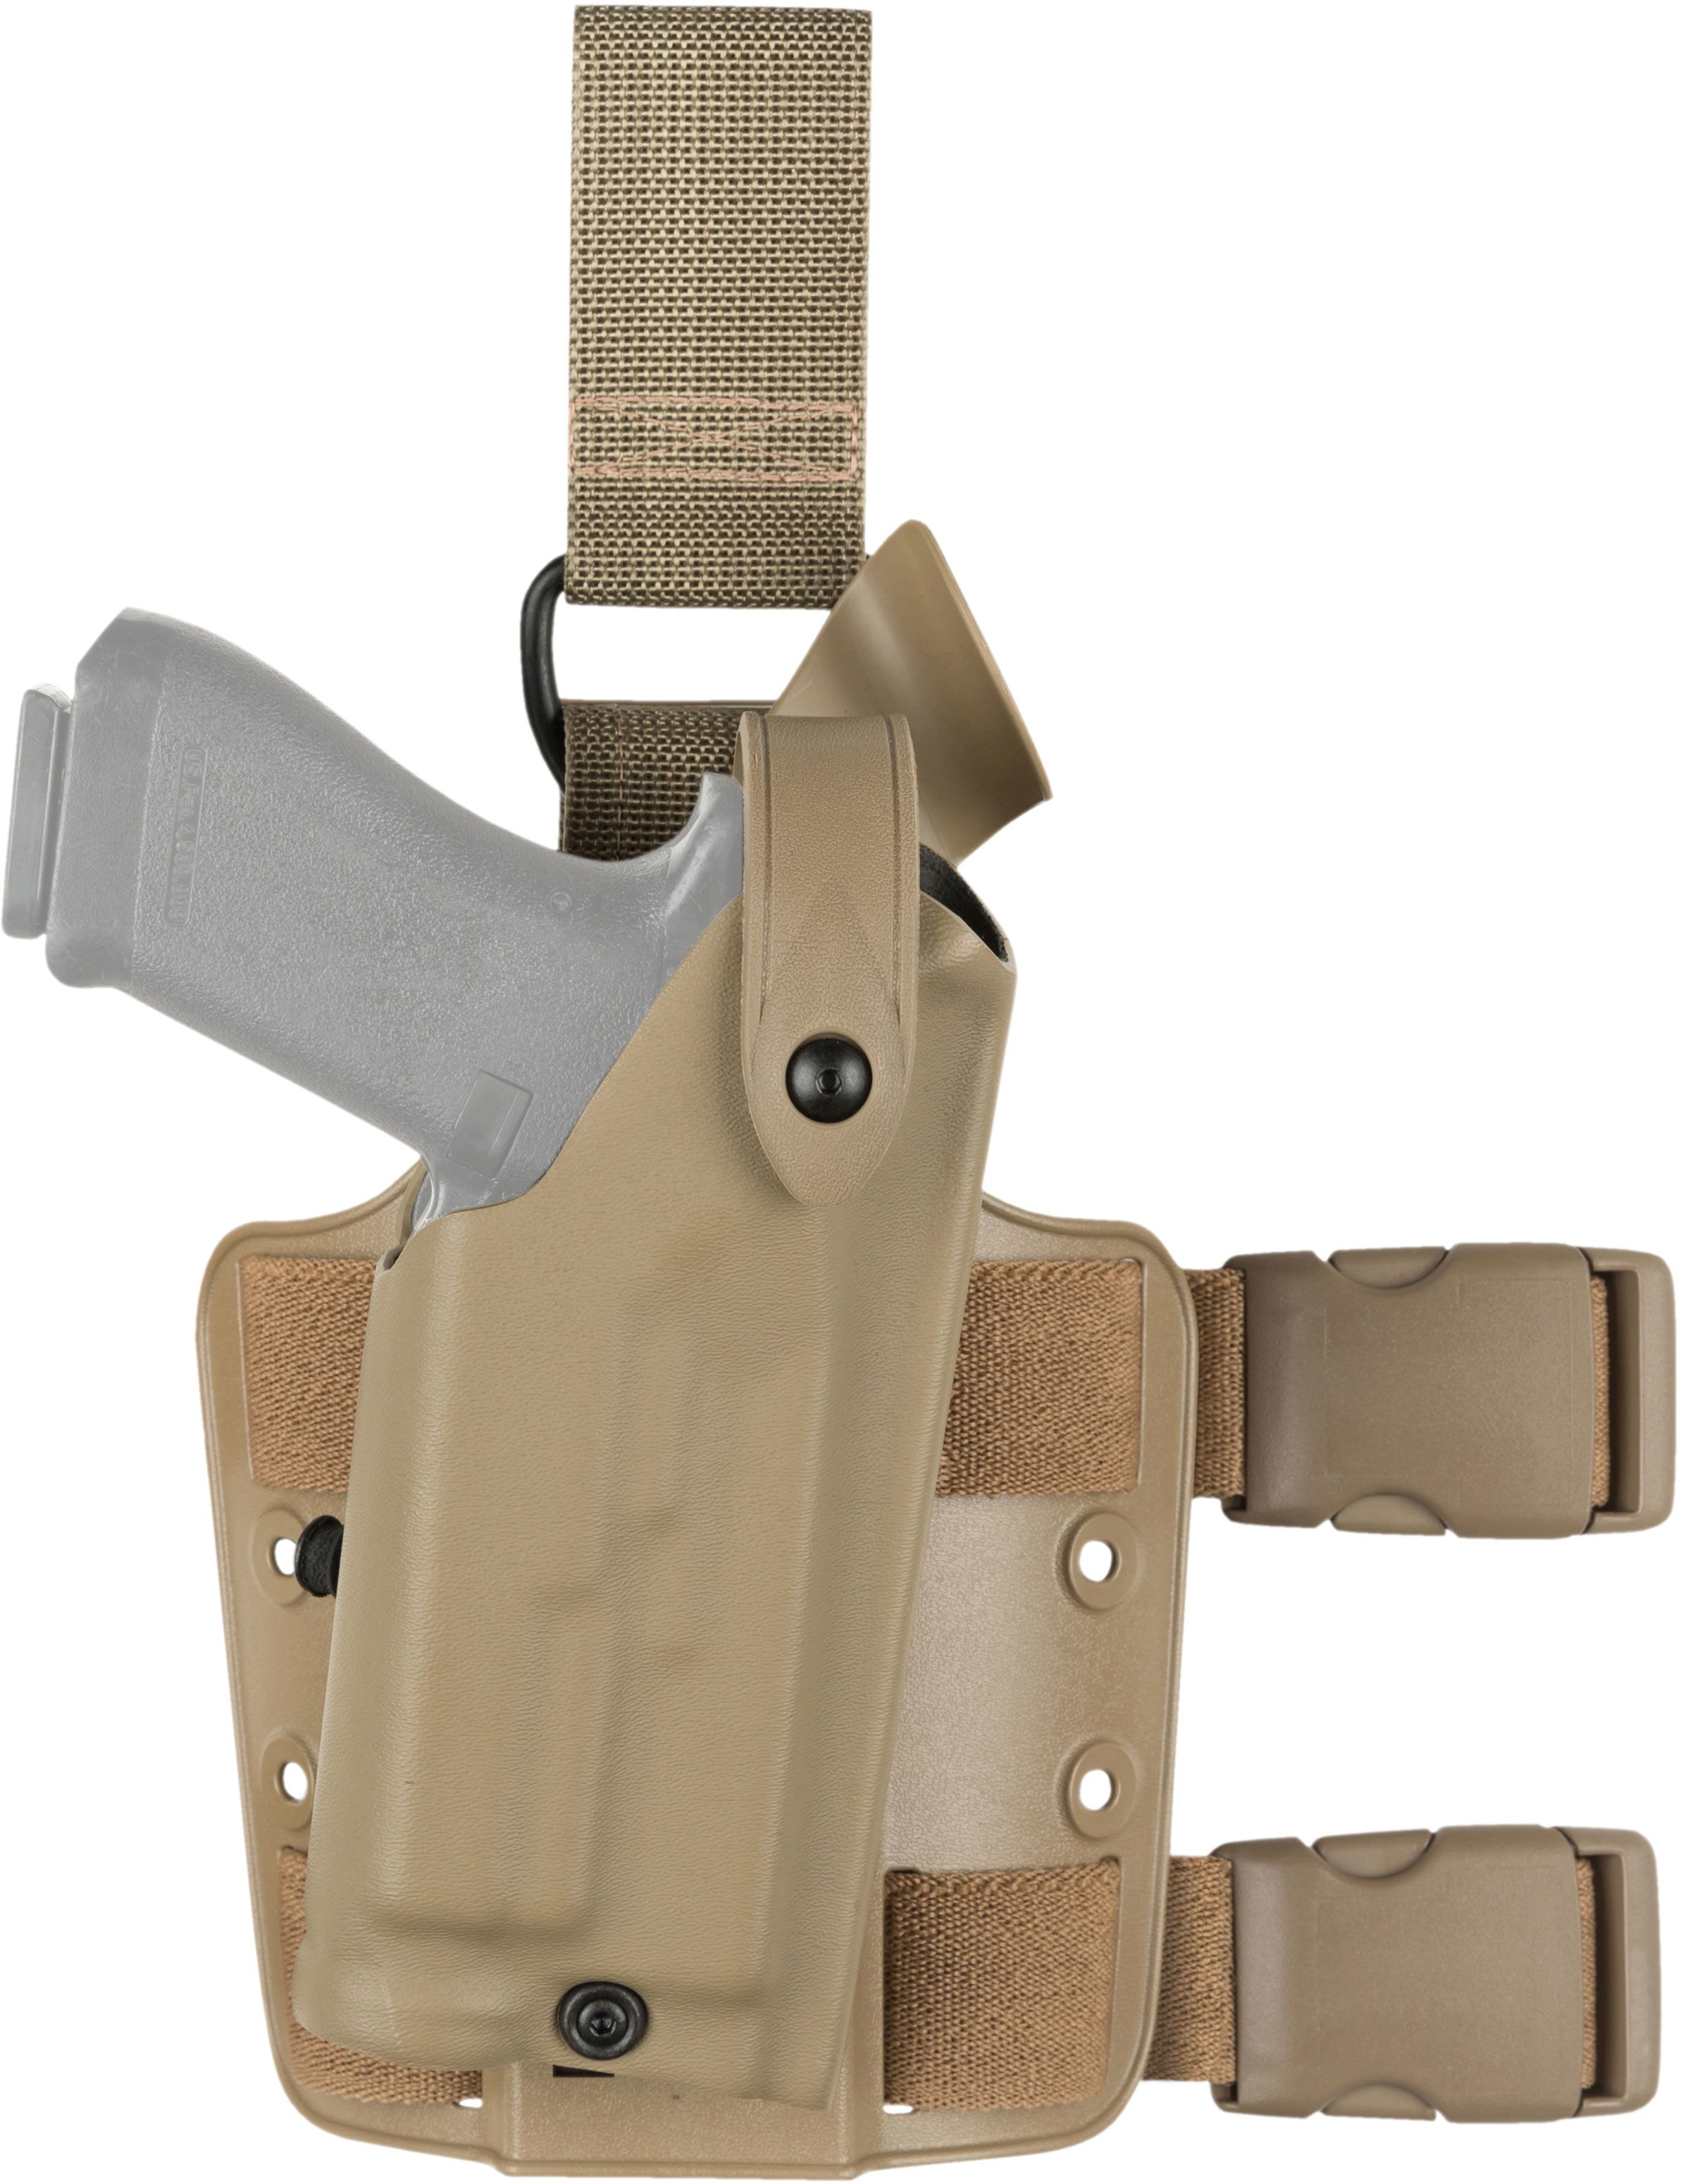 Safariland 6304 ALS Tactical Holster Right Hand STX FDE : 6304-2832-551-MS15